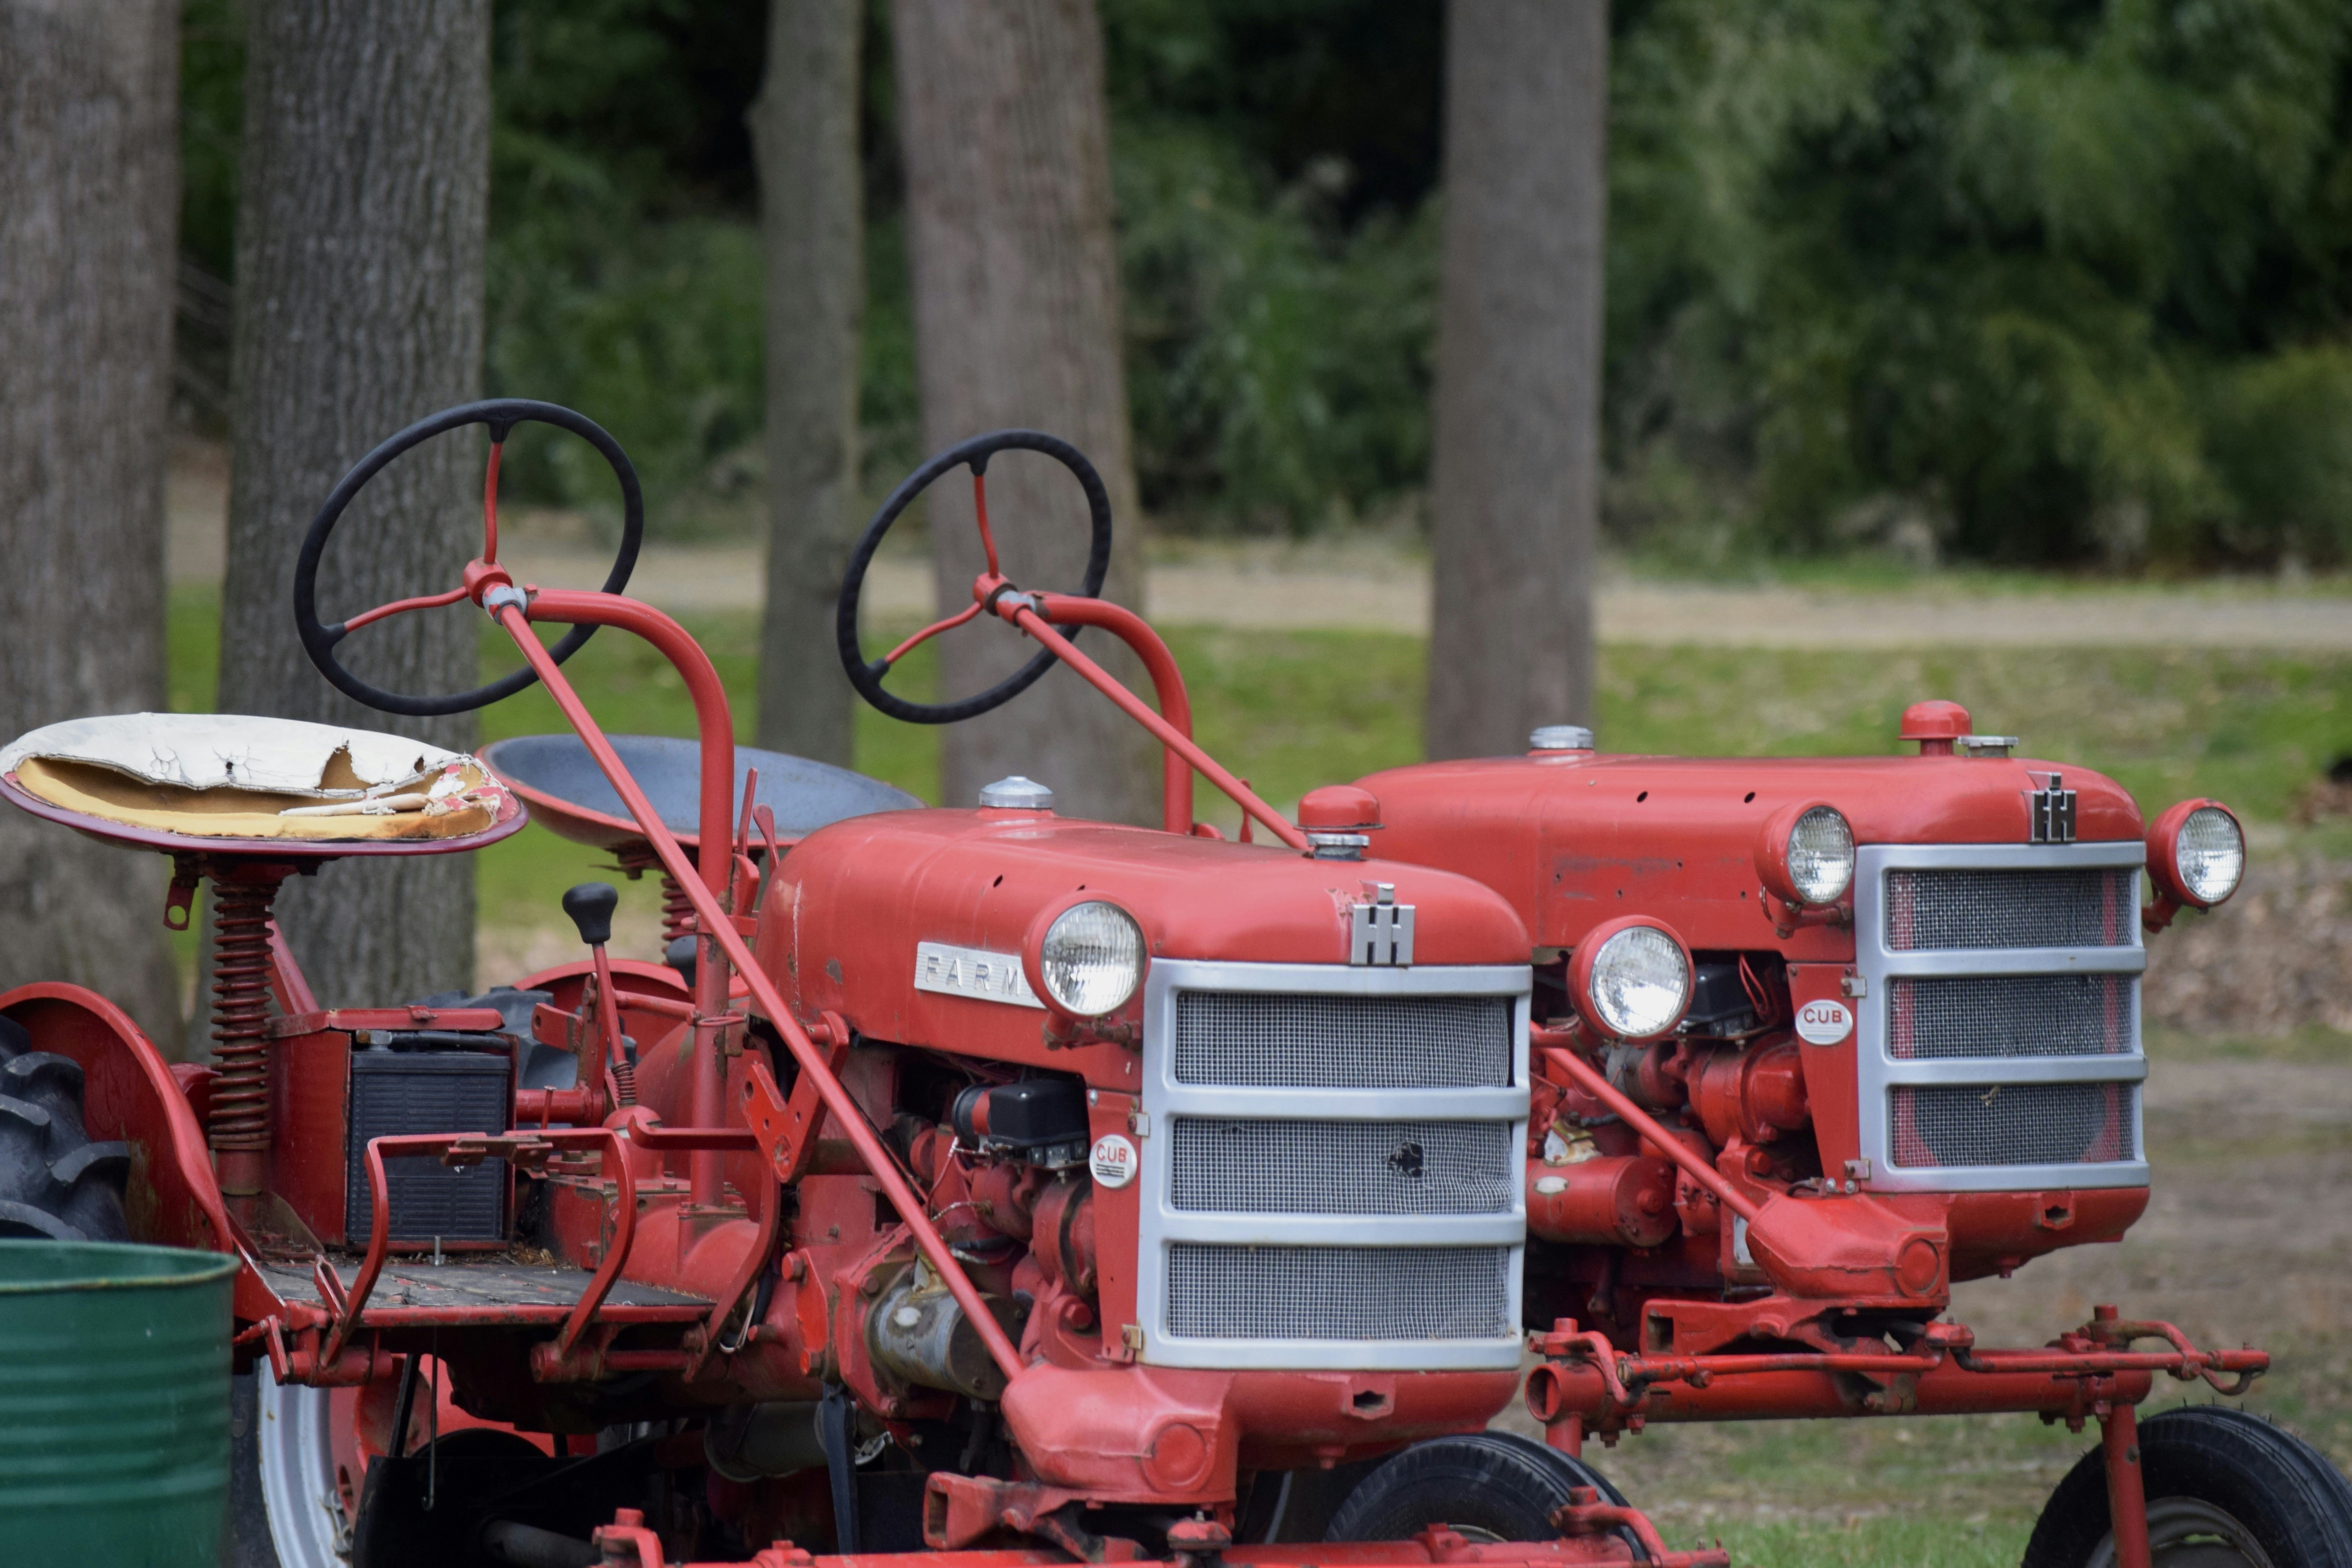 Tractors at Carousel park.